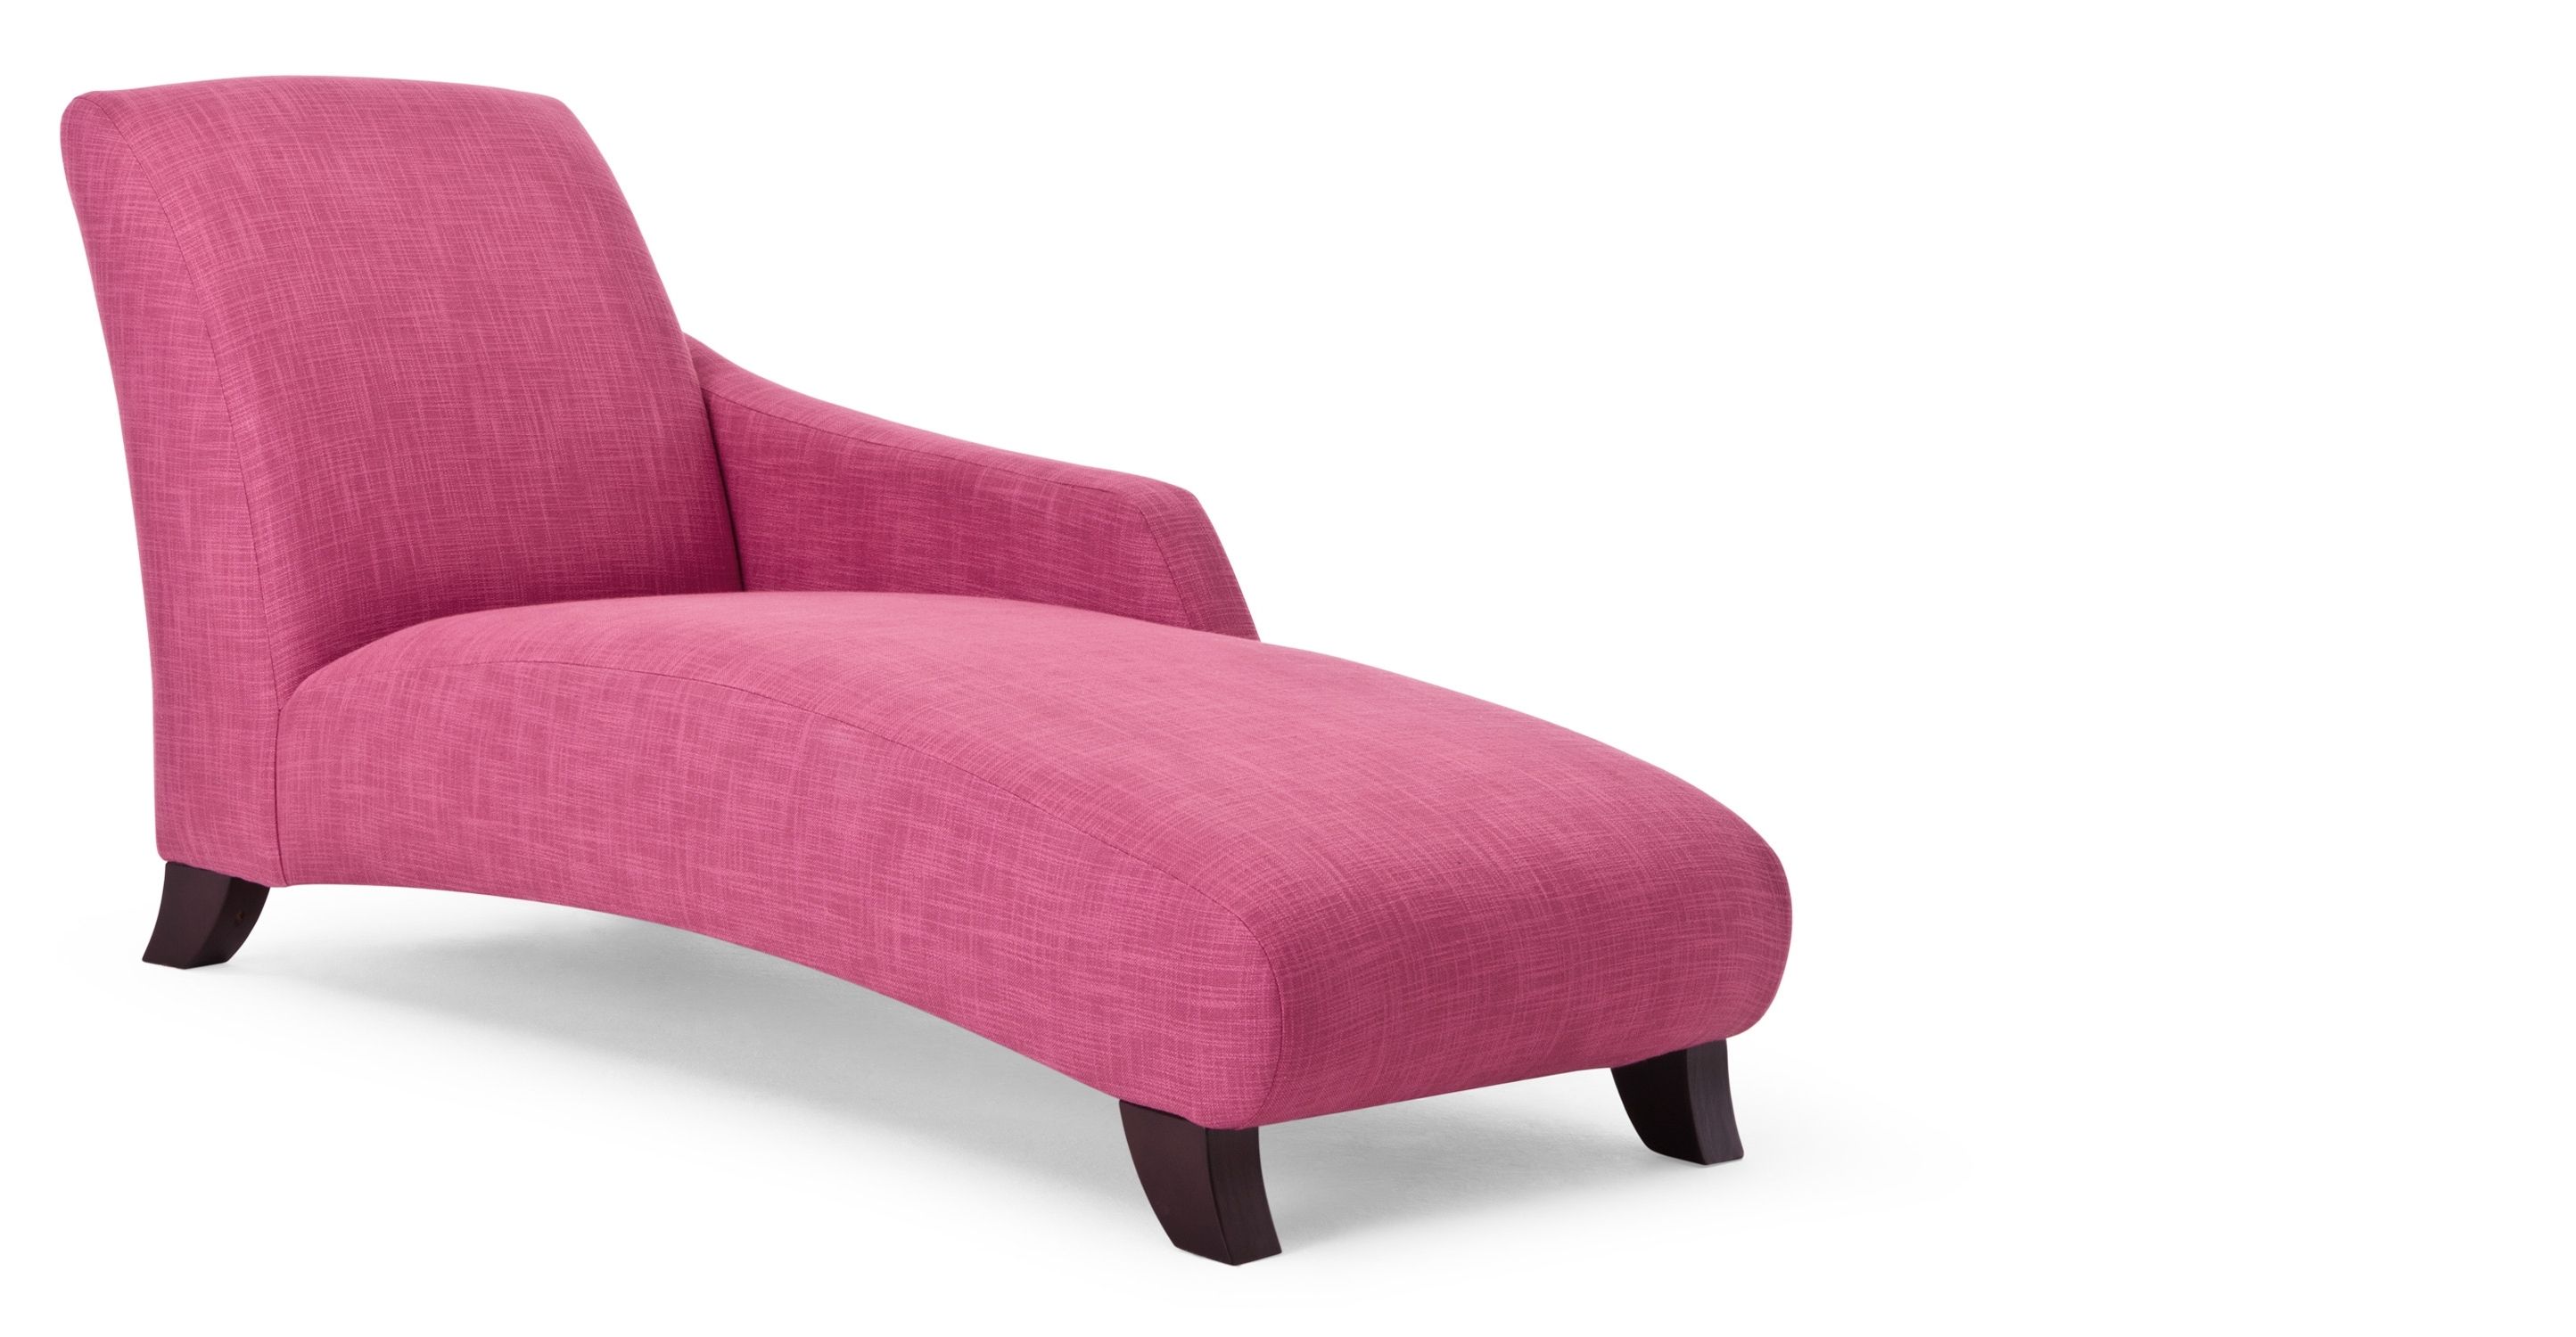 Hot Pink Chaise Lounge Chairs Inside Most Current Pink Chaise Lounge Chairs • Lounge Chairs Ideas (View 2 of 15)